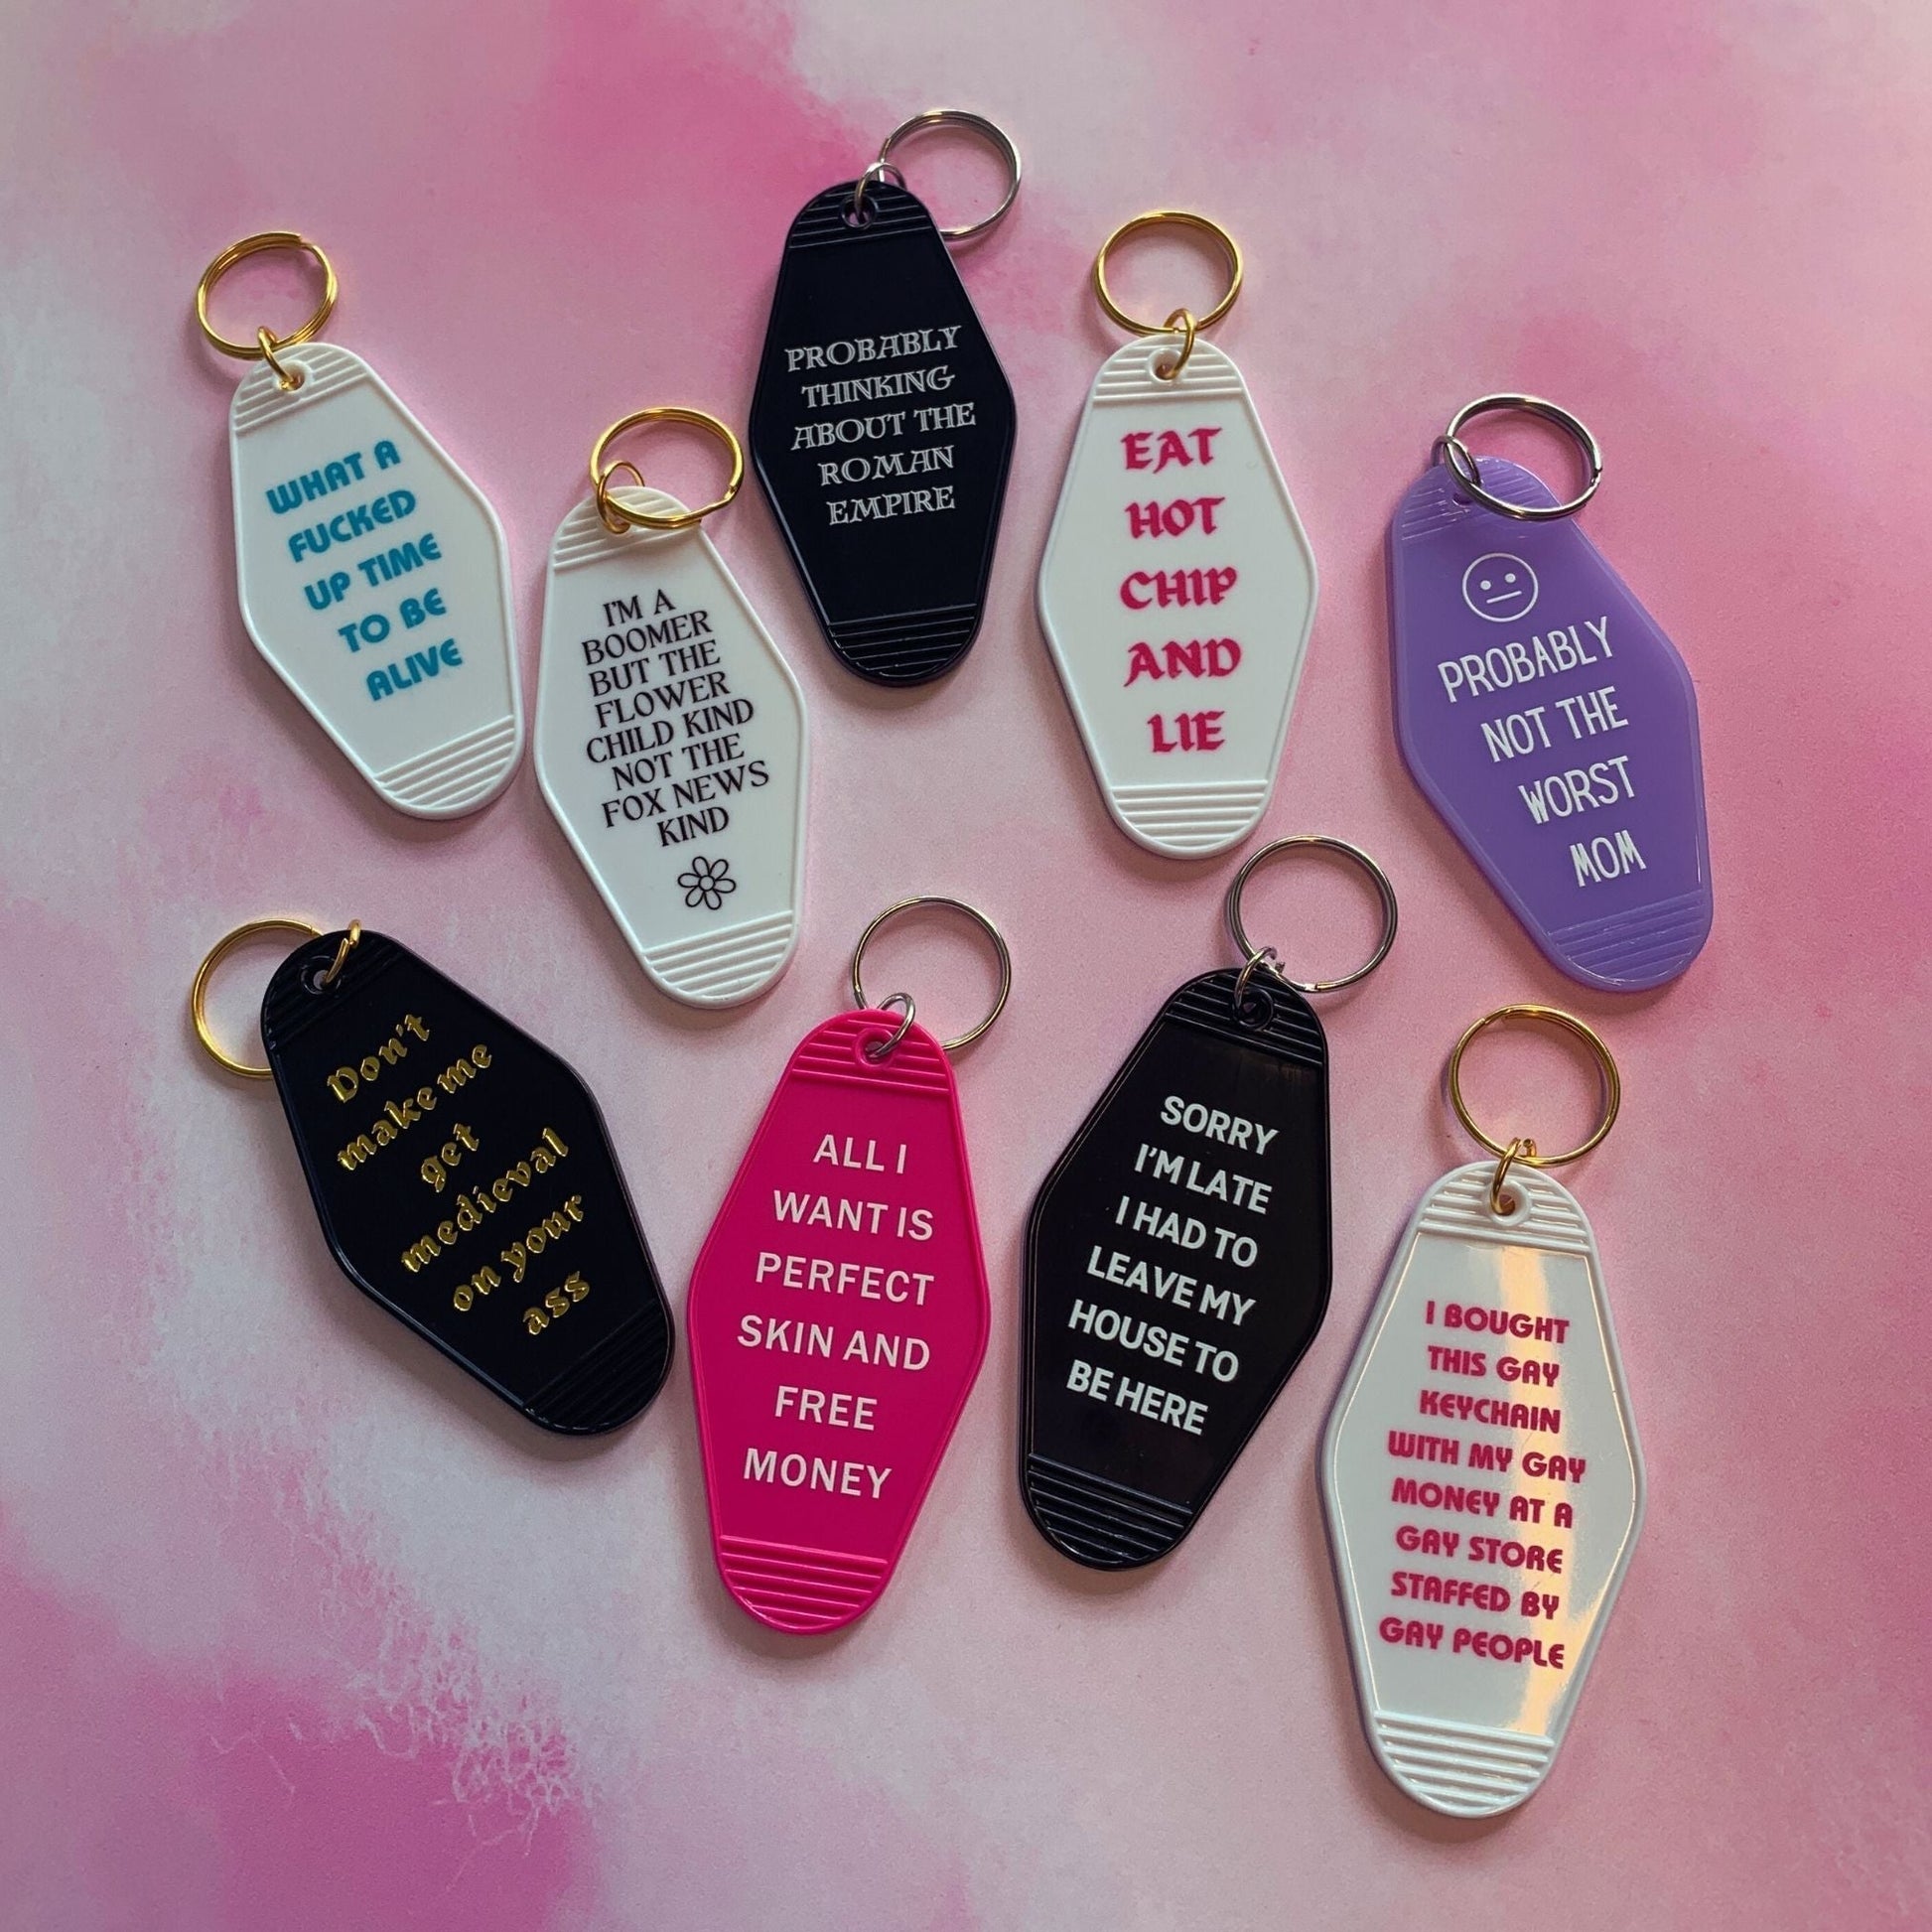 All I Want is Perfect Skin and Free Money Motel Style Keychain in Fuchsia Pink